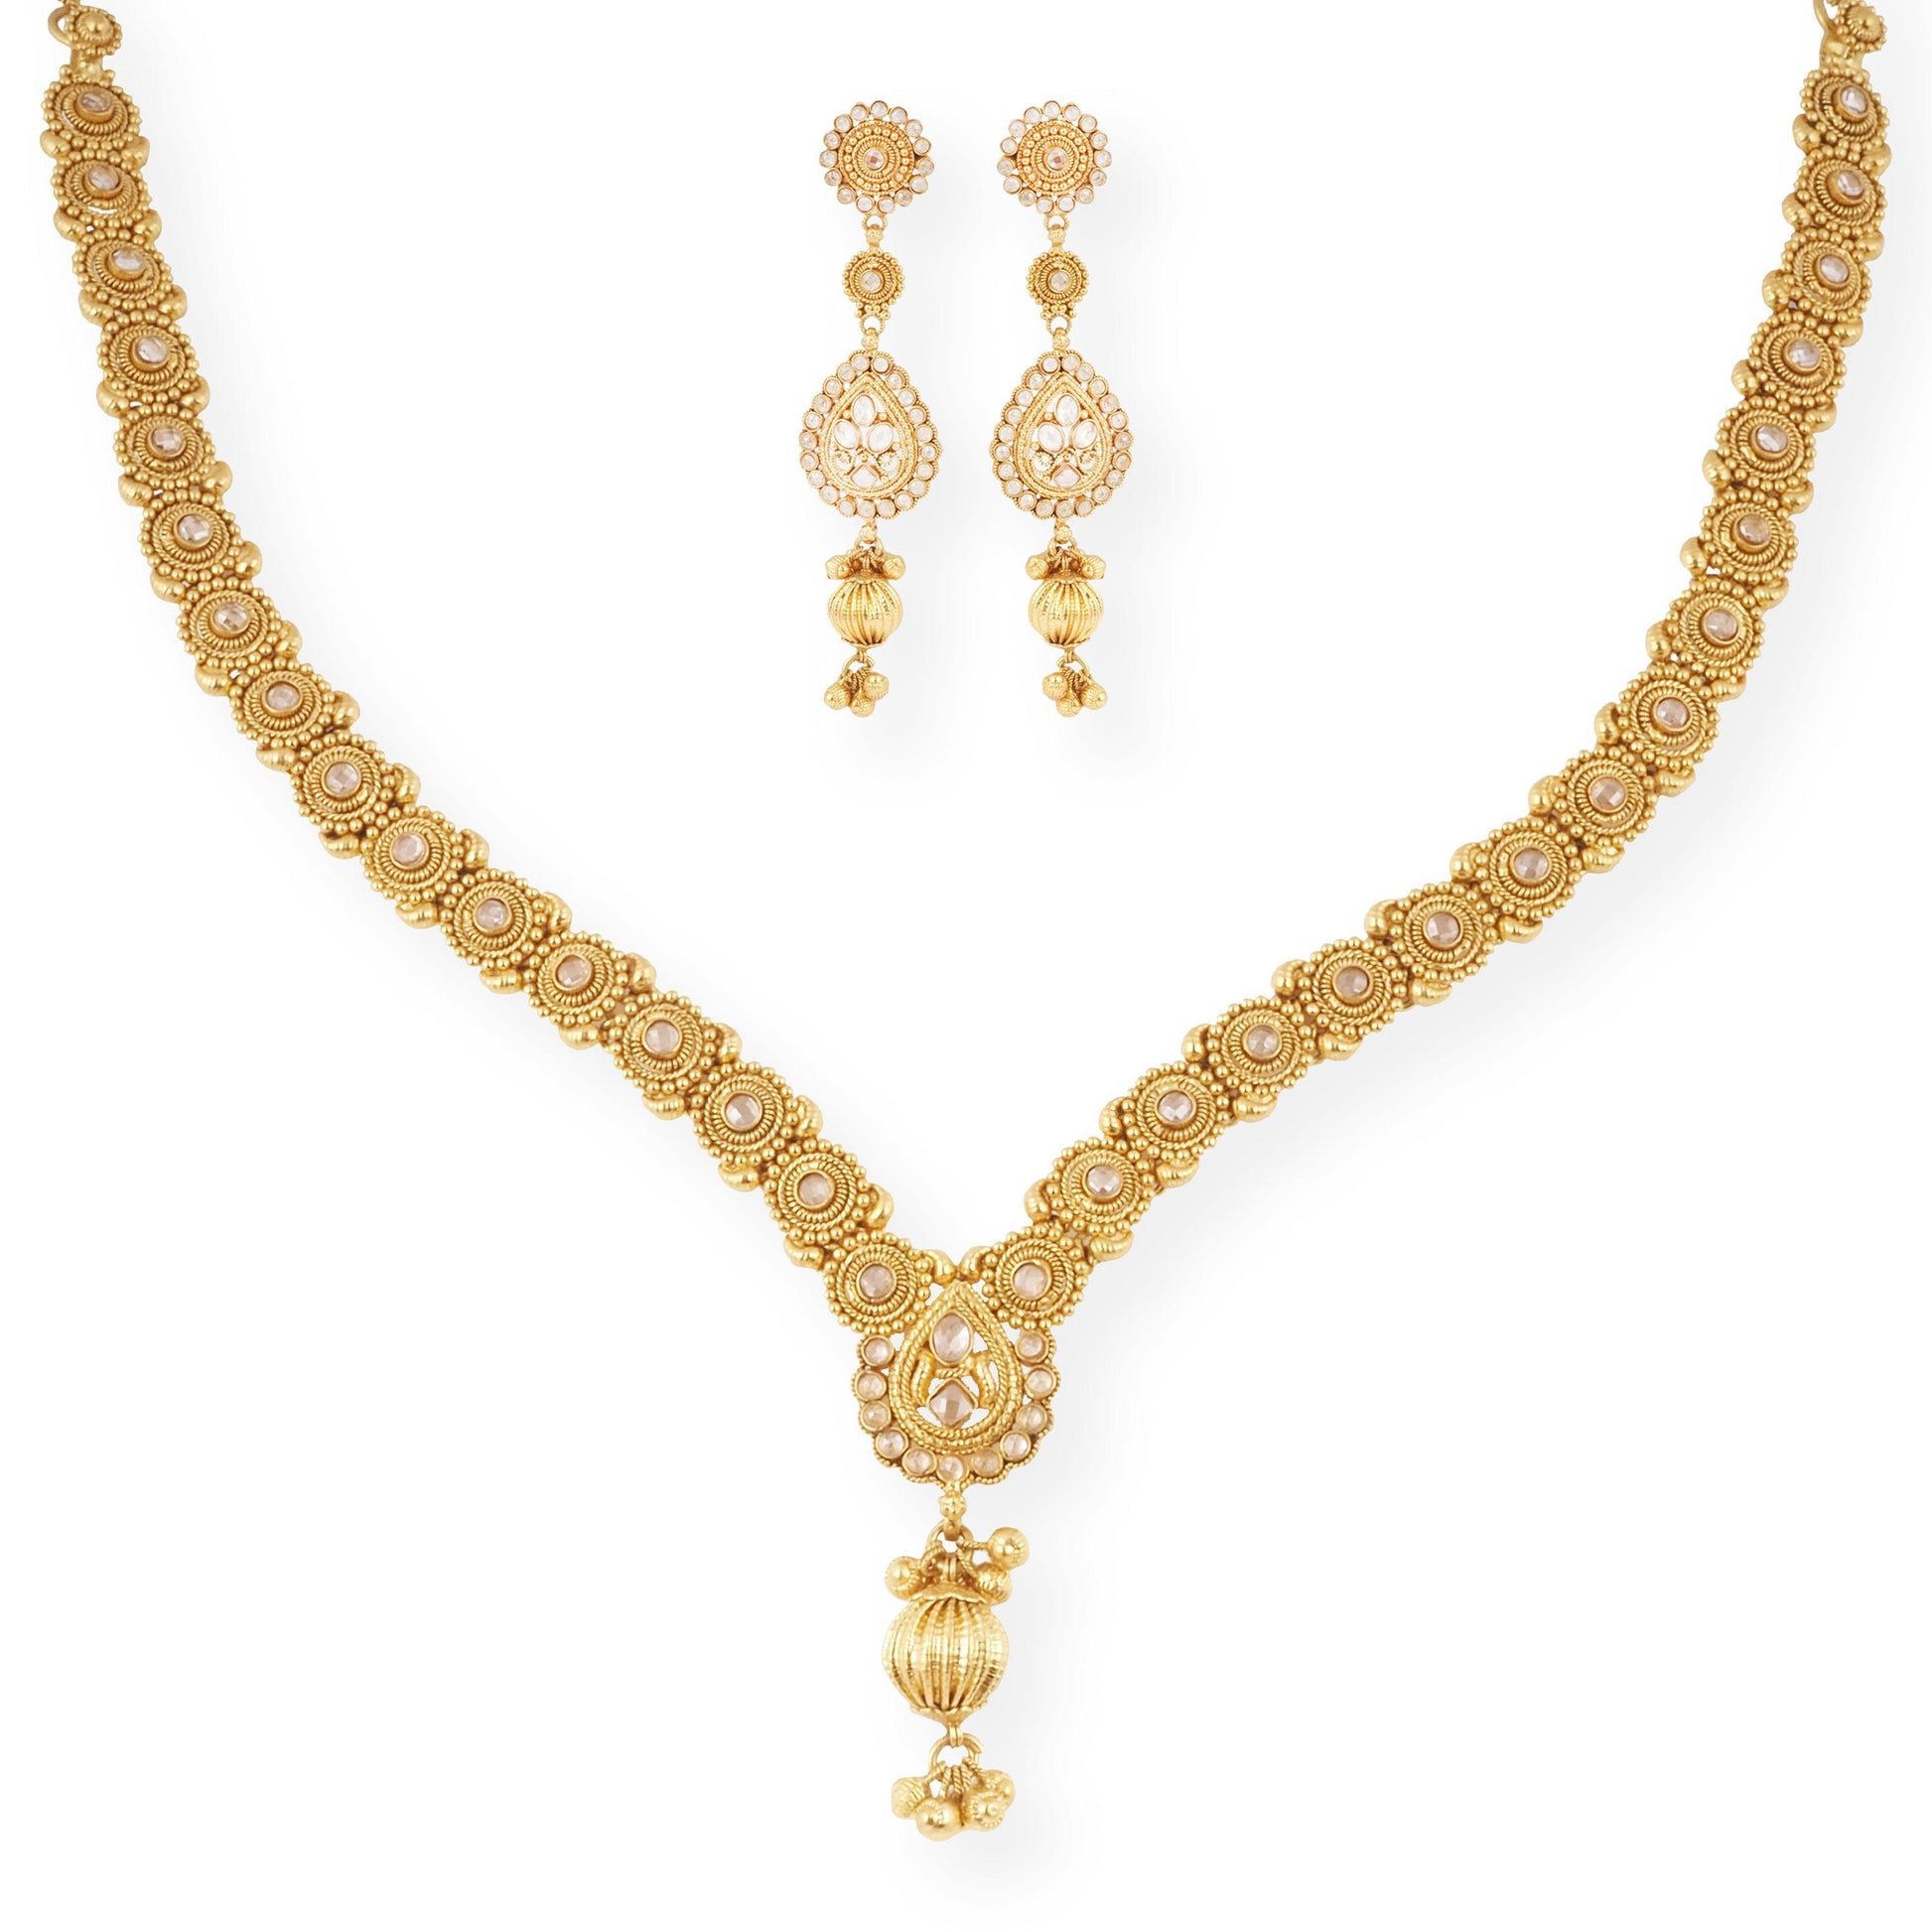 22ct Gold Antiquated Look Necklace with Cubic Zirconia Stones and Hook Clasp-8605 - Minar Jewellers